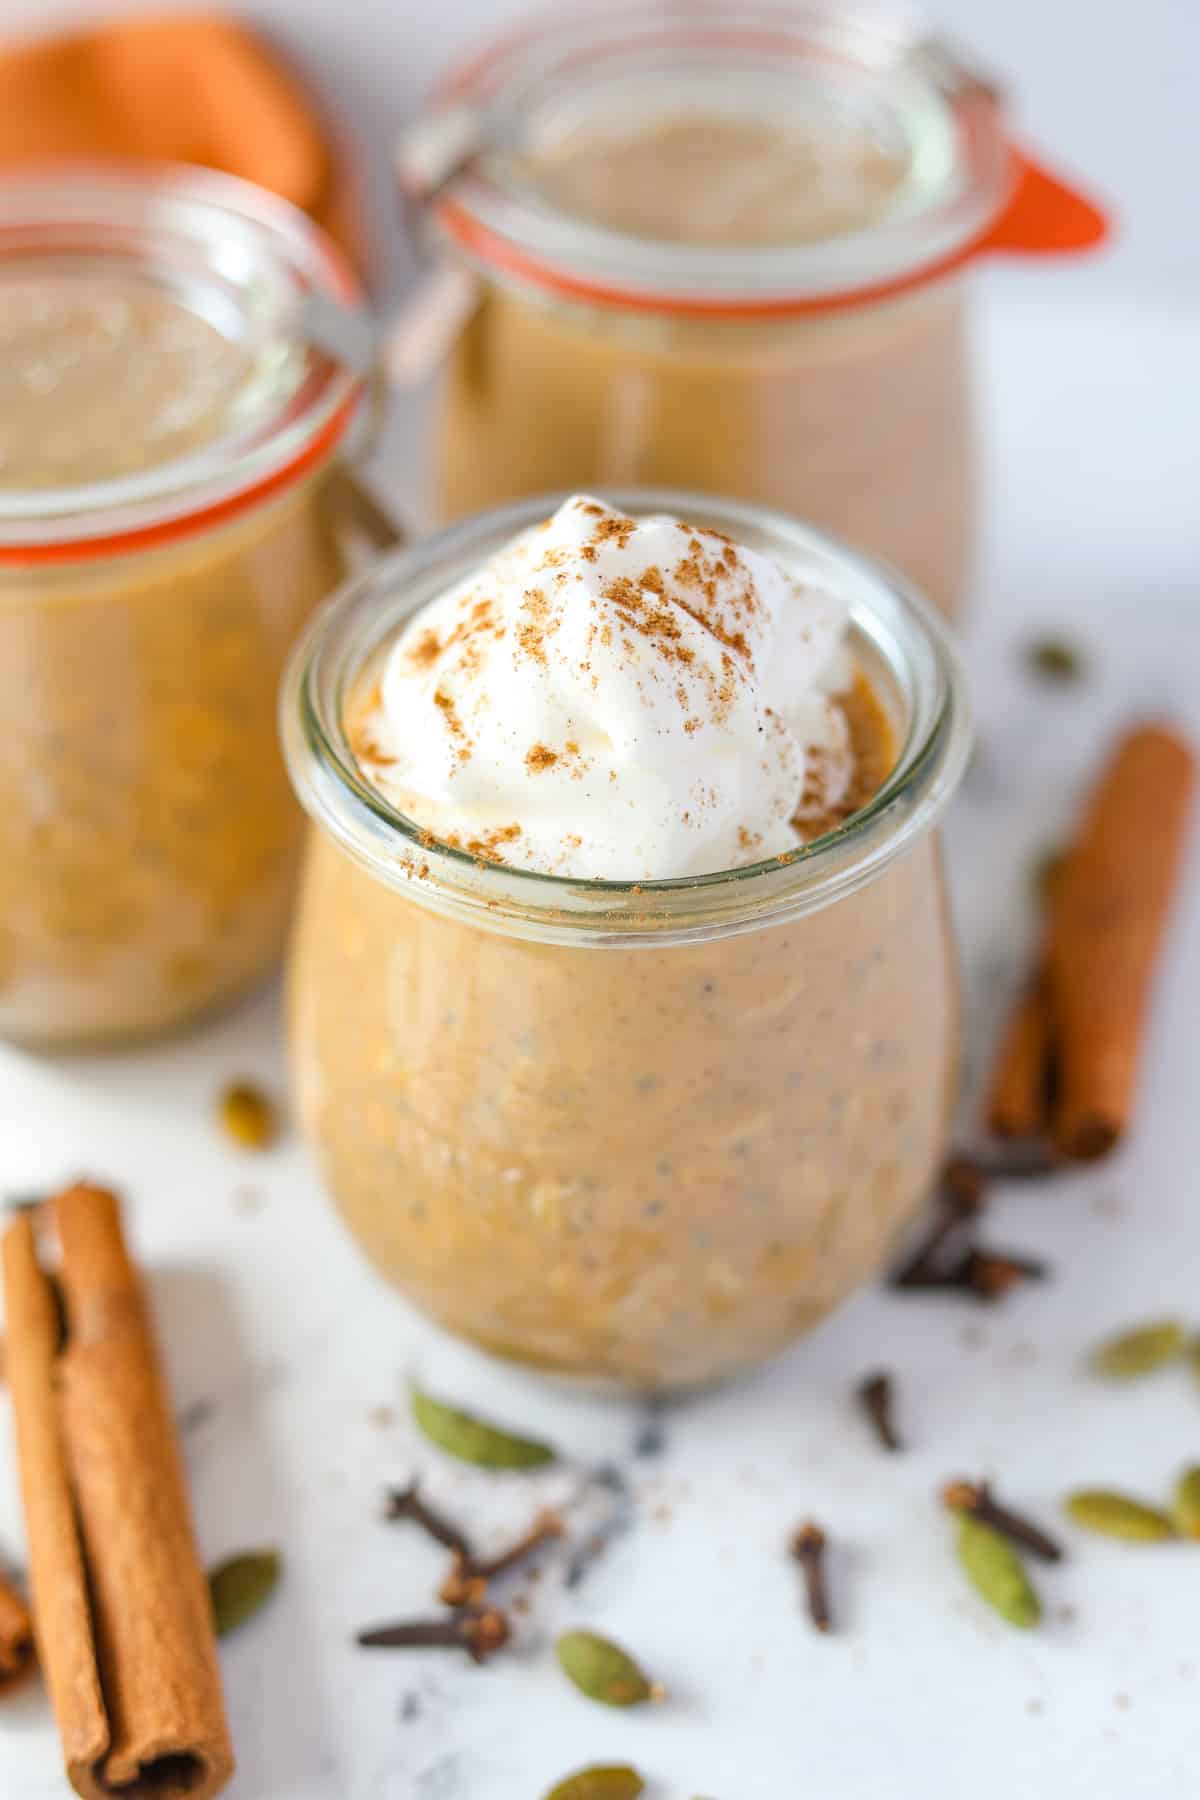 A small jar of pumpkin overnight oatmeal, garnished with whipped cream.